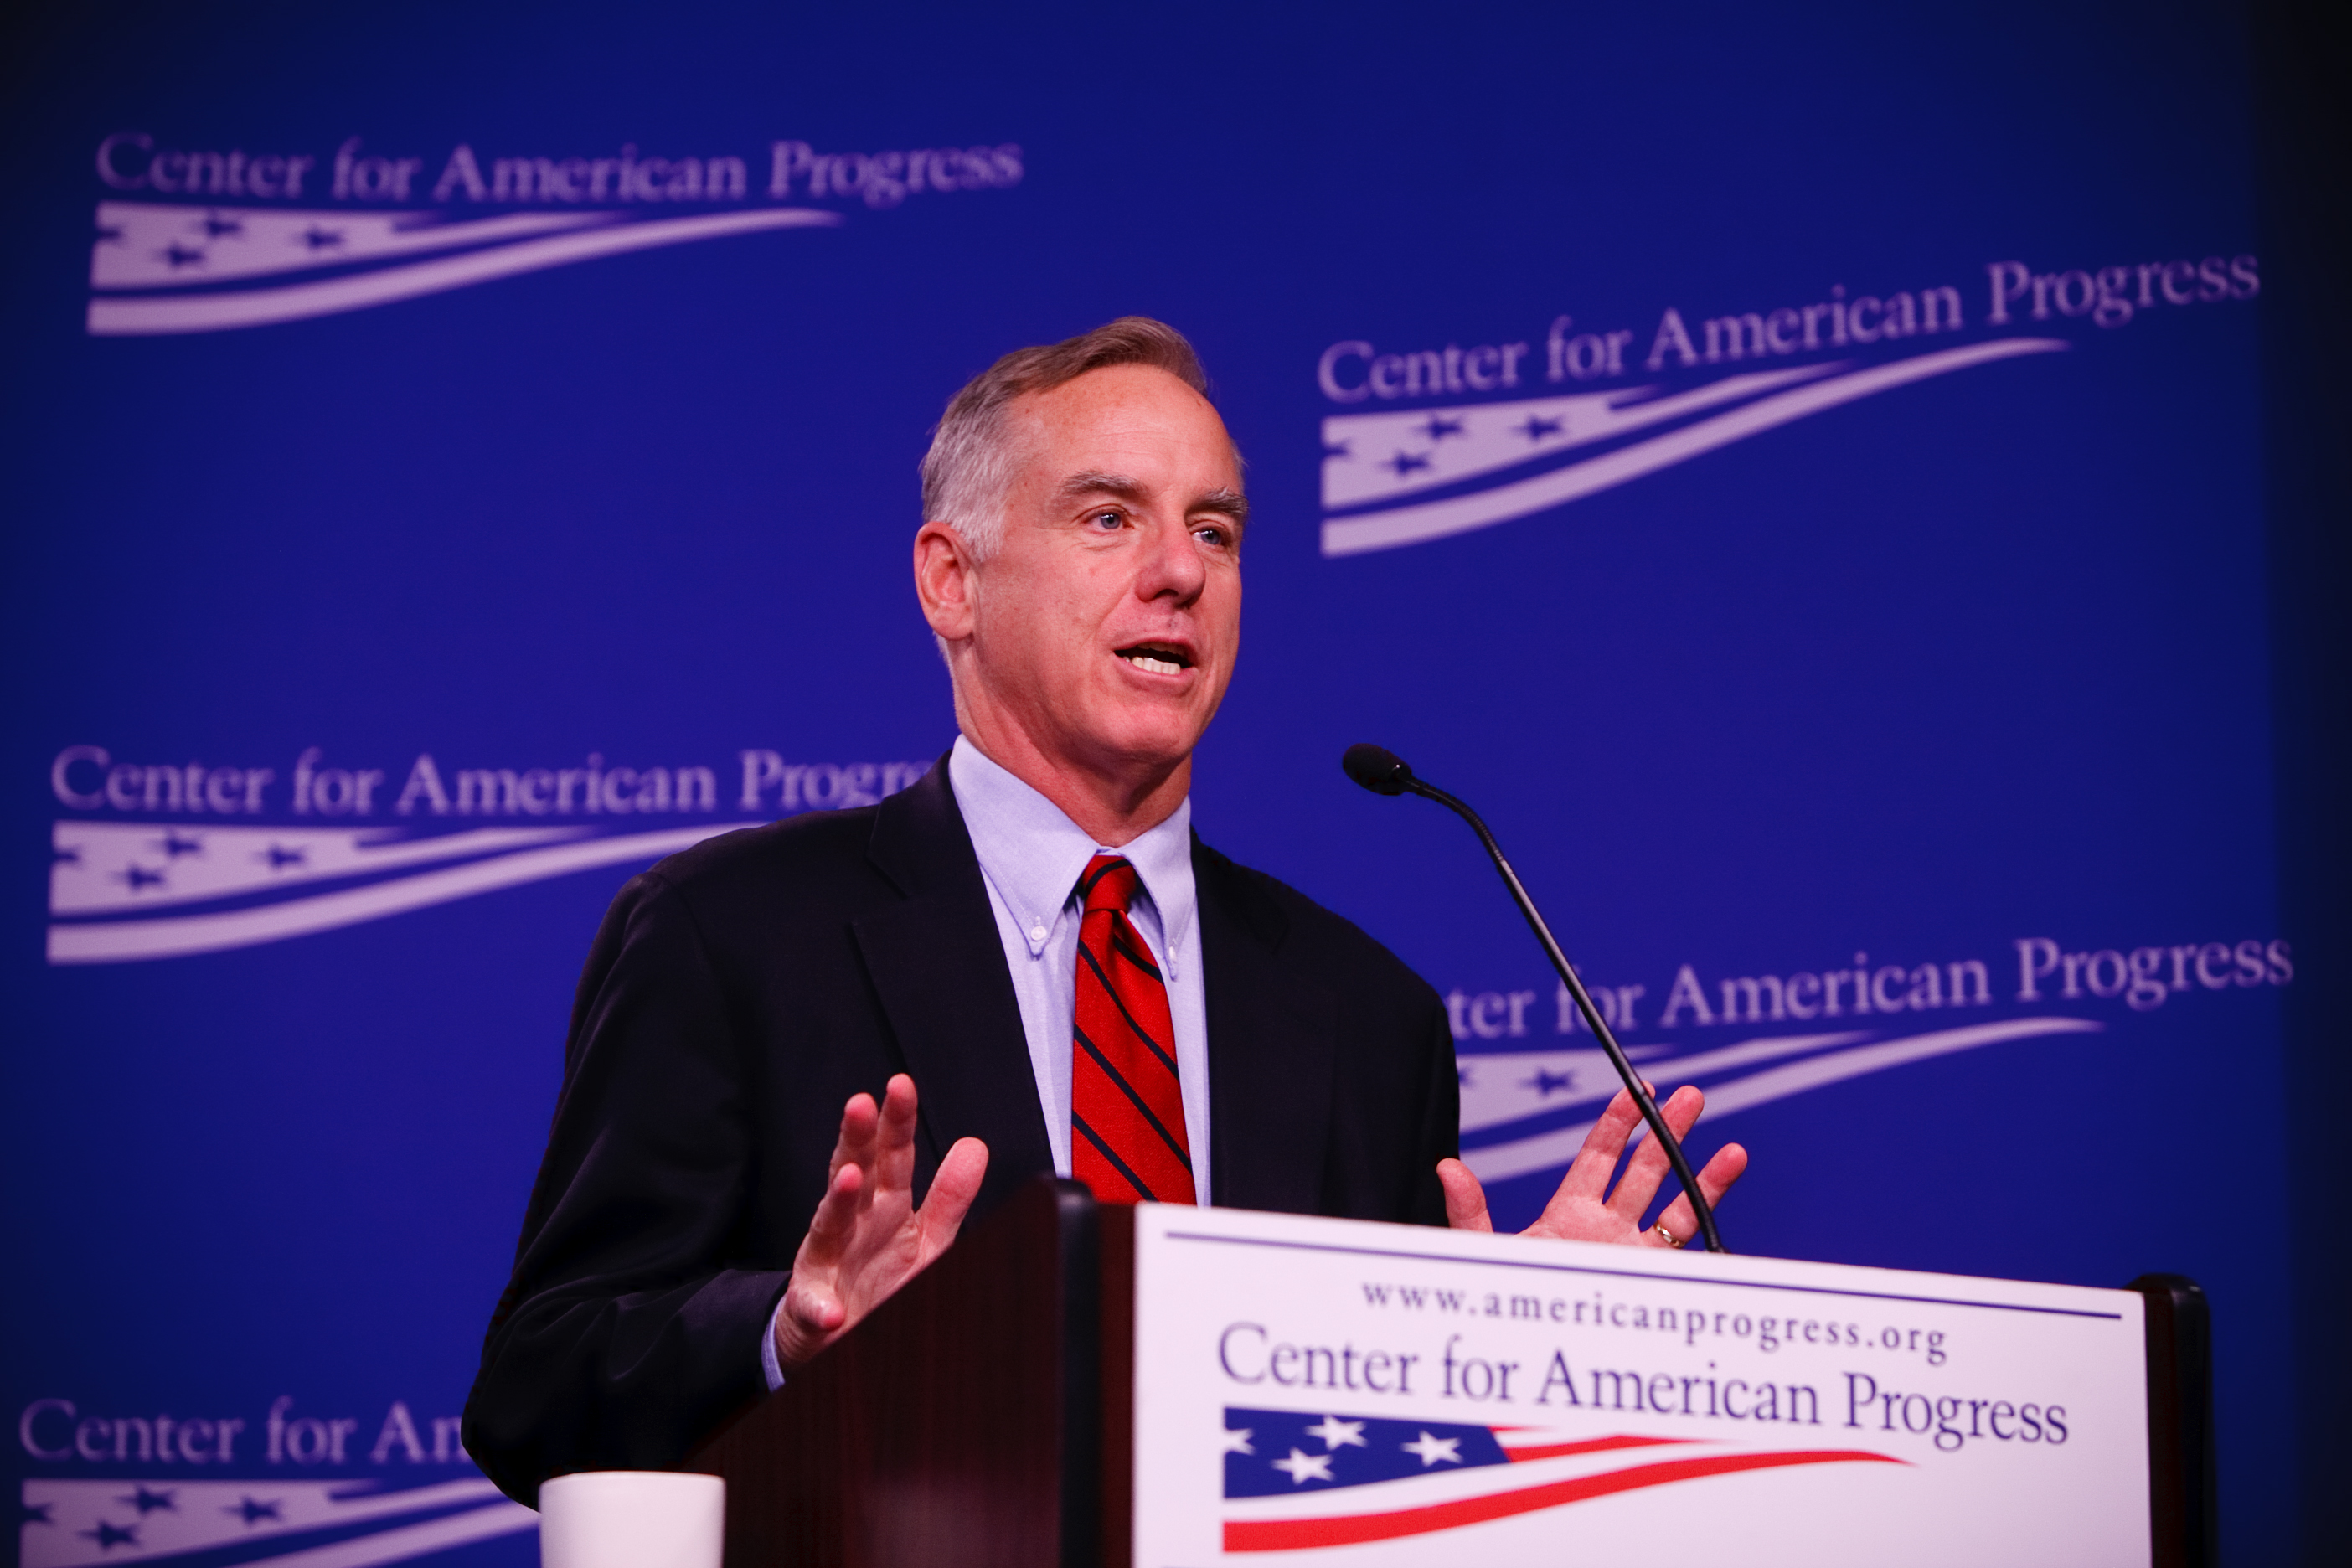 Governor Howard Dean at the Center for American Progress